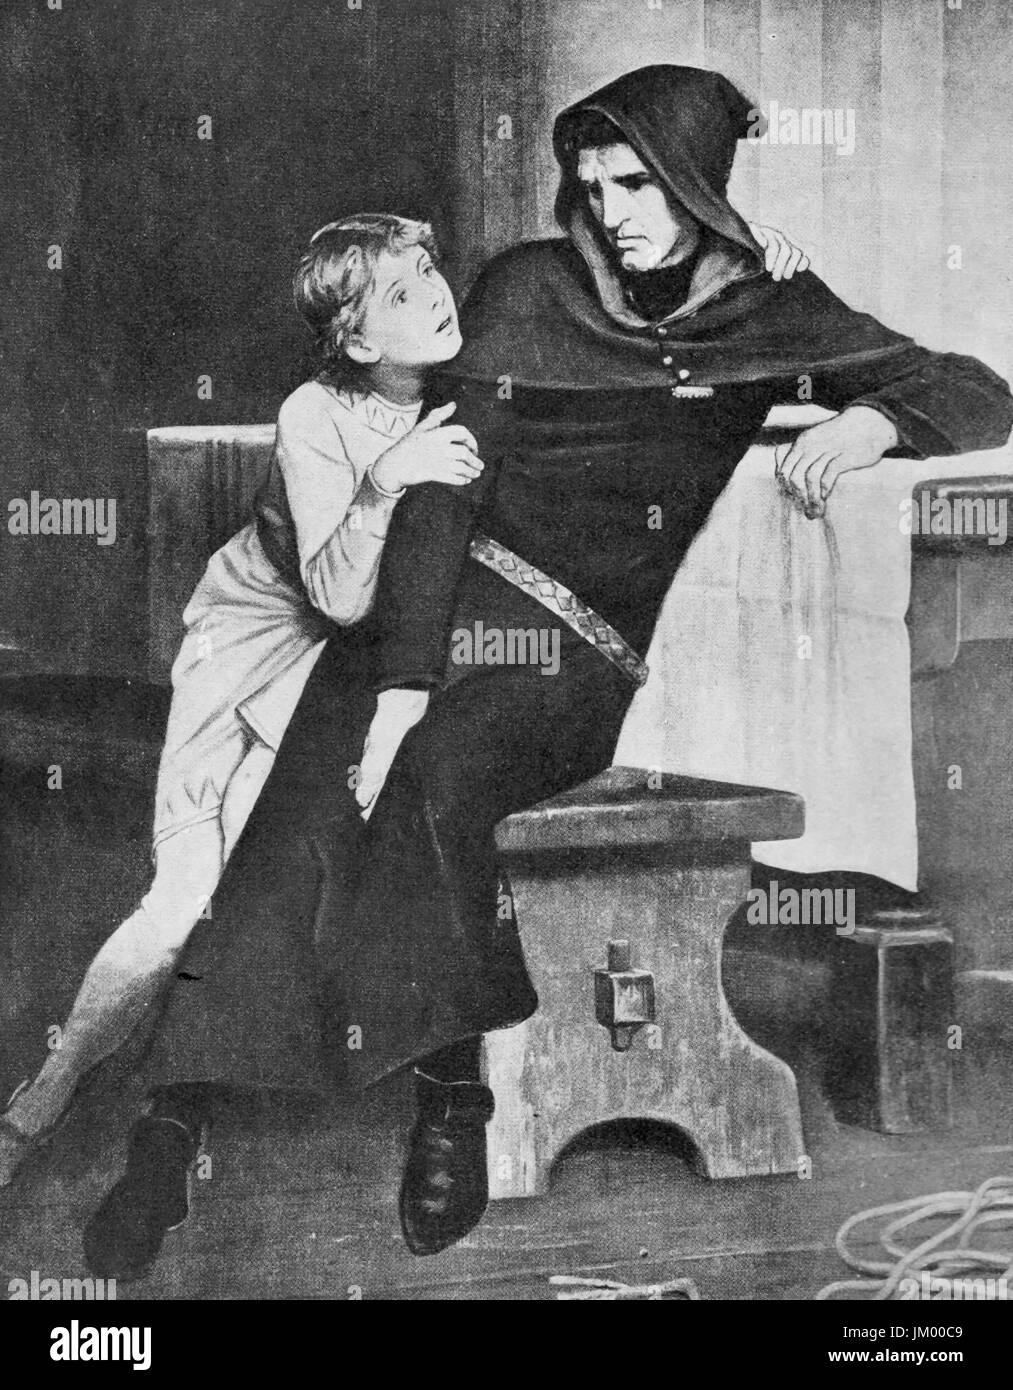 A  circa 1930's depiction of  Prince Arthur of Brittany (&England) and his jailer, Huber (Hubert) Stock Photo